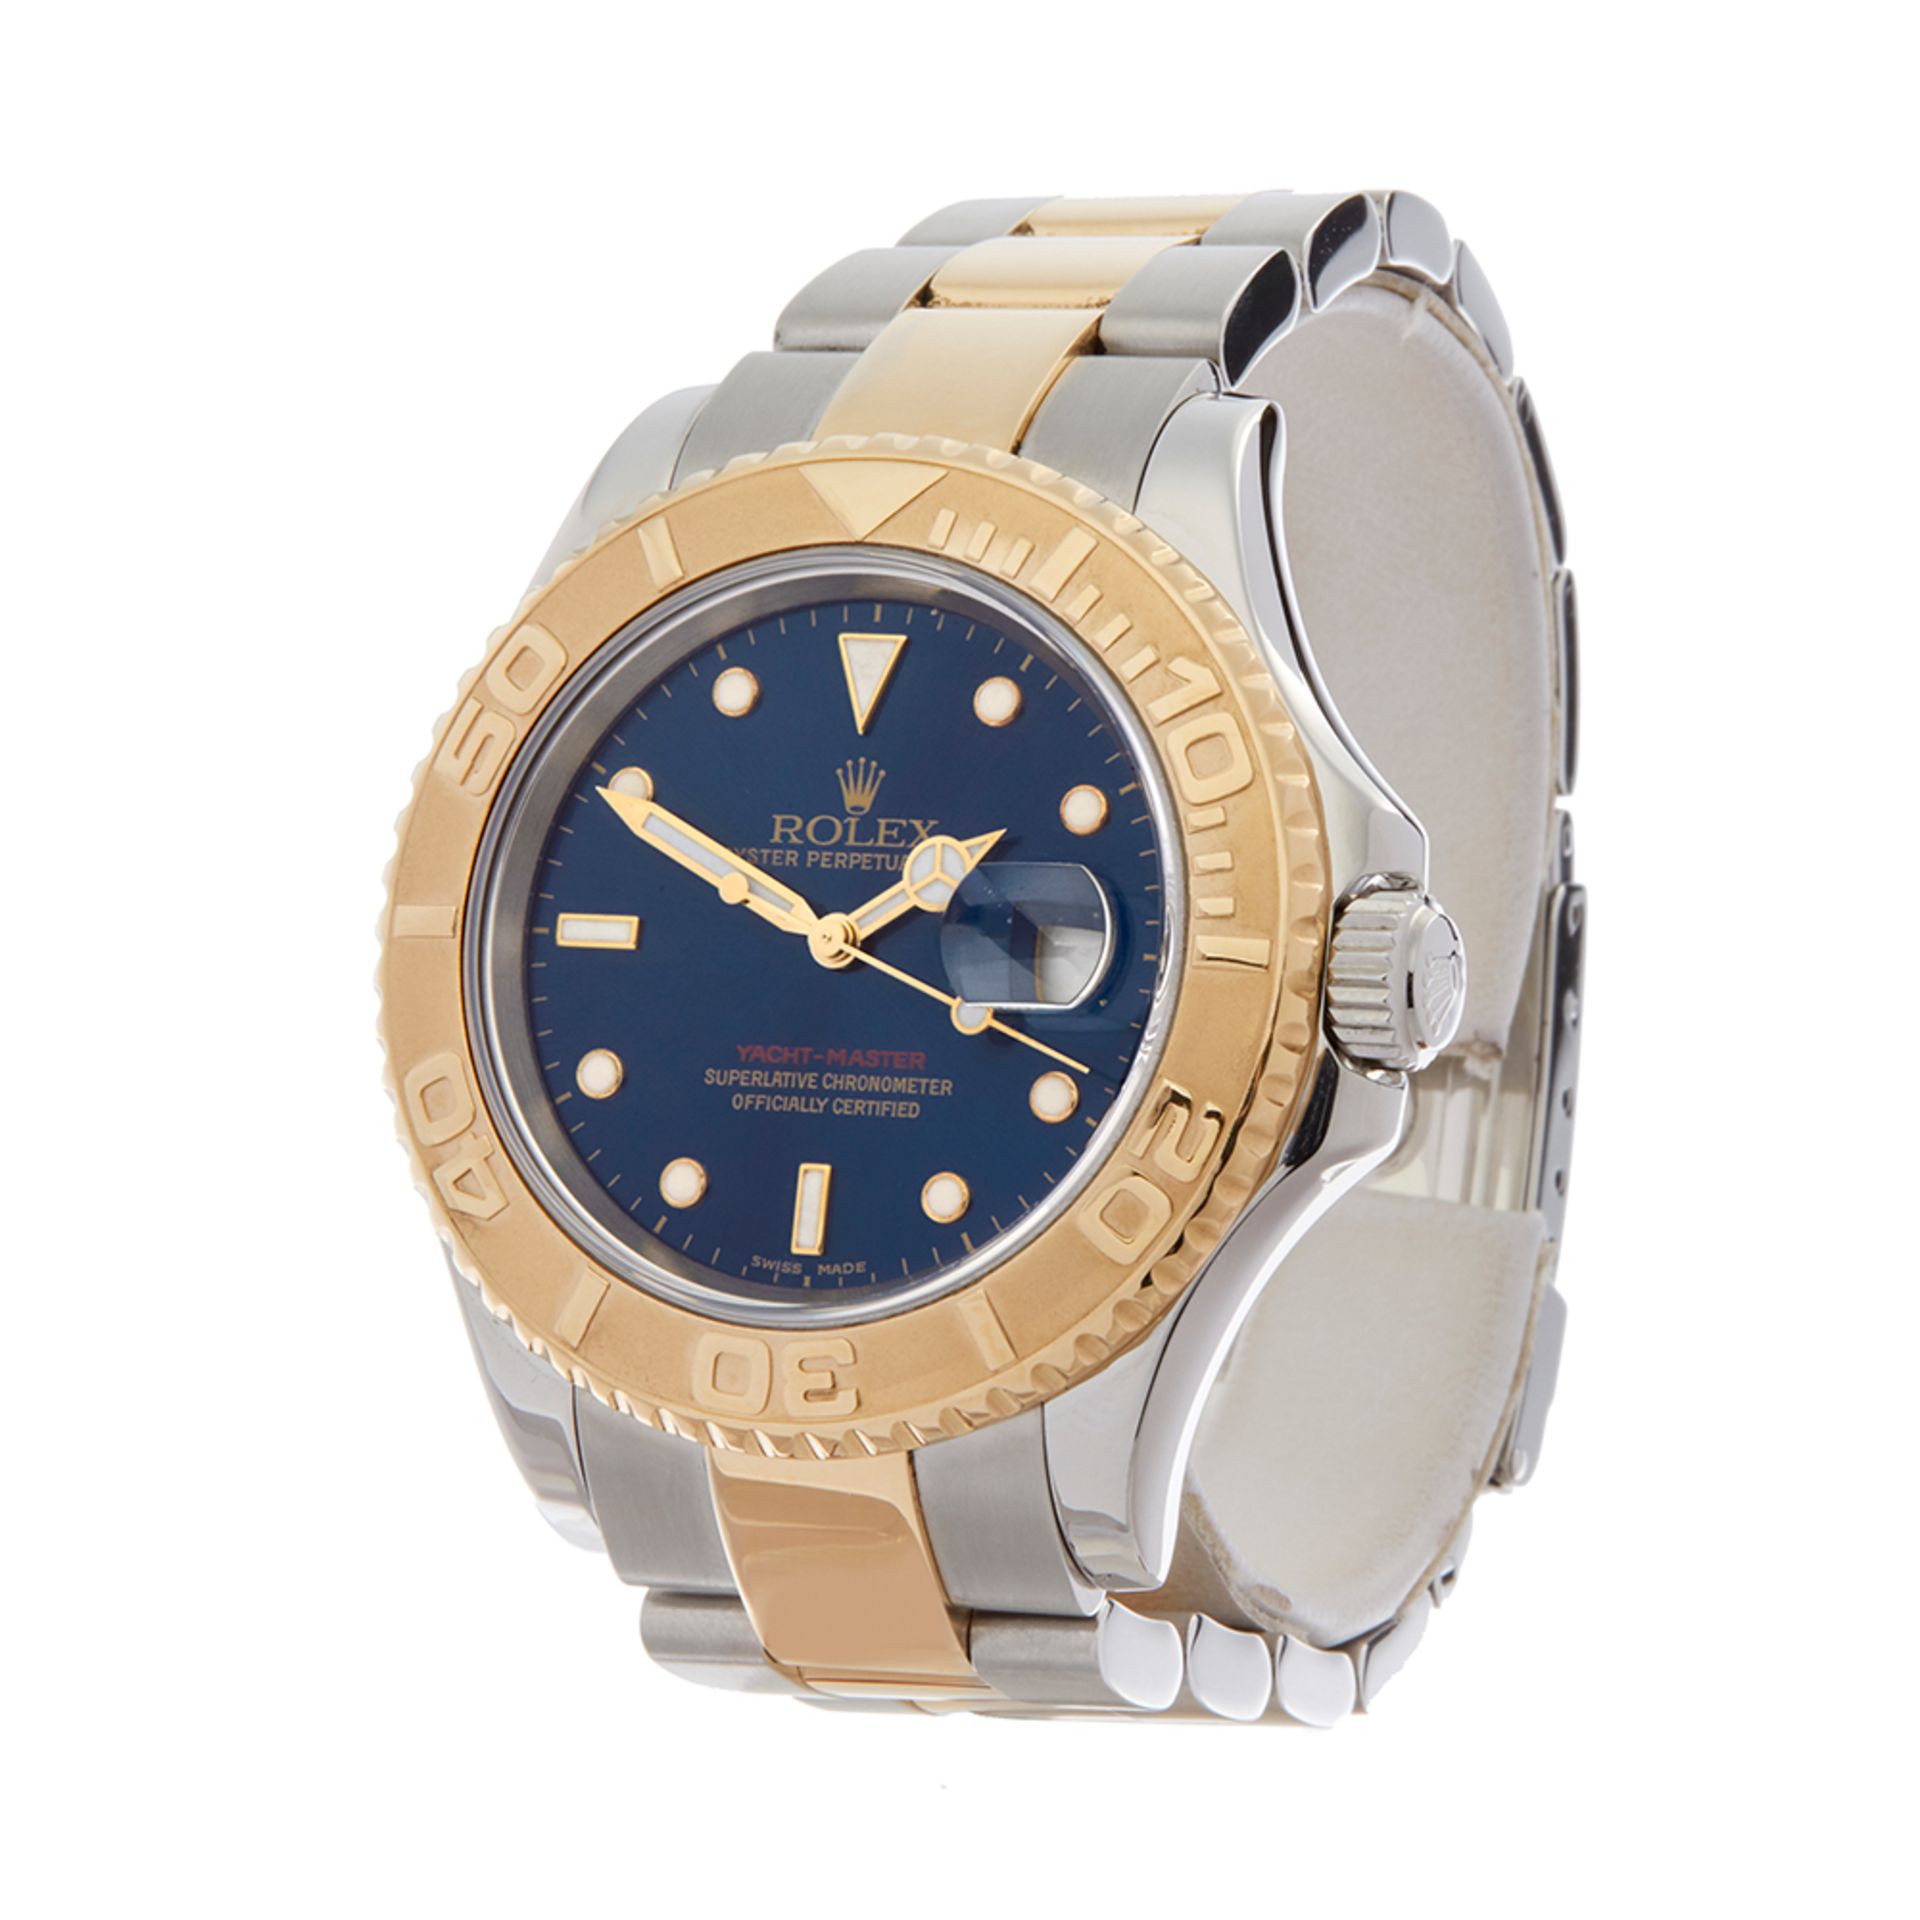 Rolex Yacht-Master Stainless Steel & 18k Yellow Gold - 16623 - Image 3 of 7